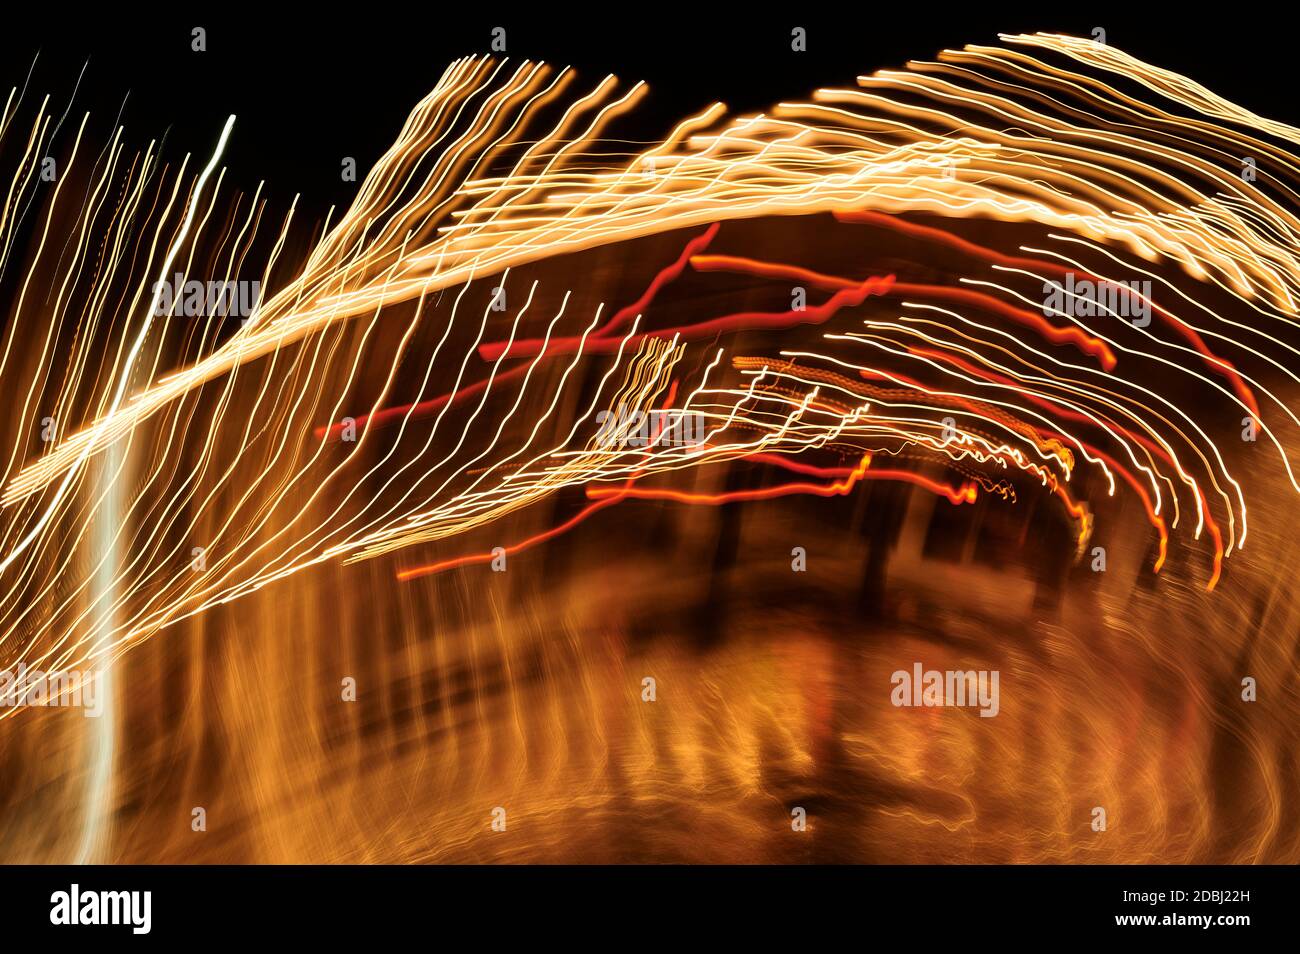 Abstract background of city lights made with long shutter speed. Lights photo art. Stock Photo